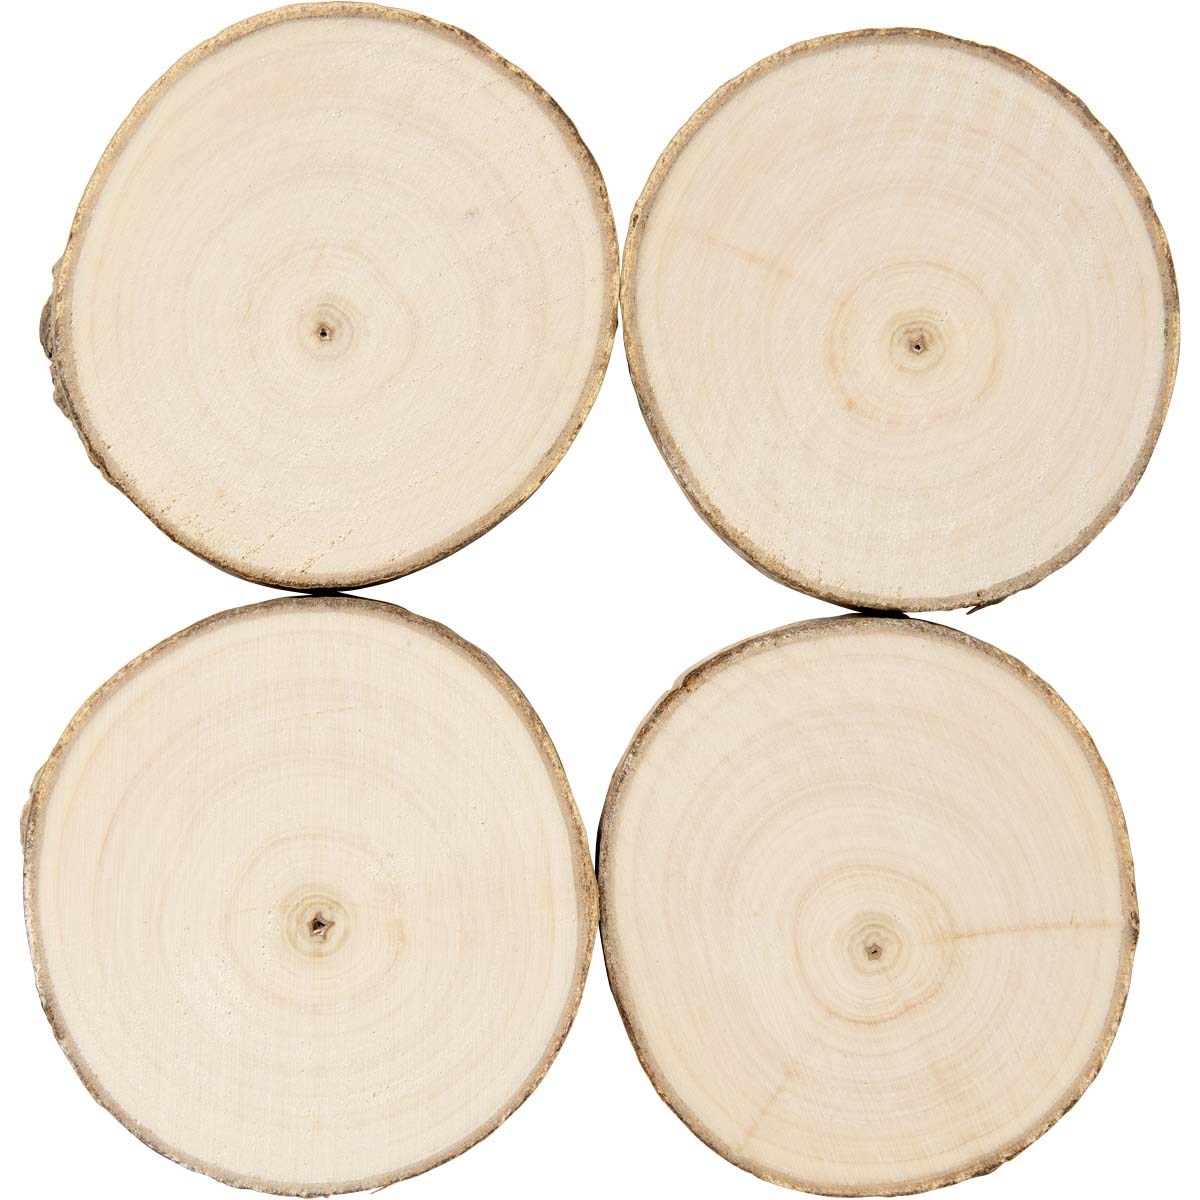 Plaid ® Wood Surfaces - Small Wood Round with Bark, 4 pc. - 44947E